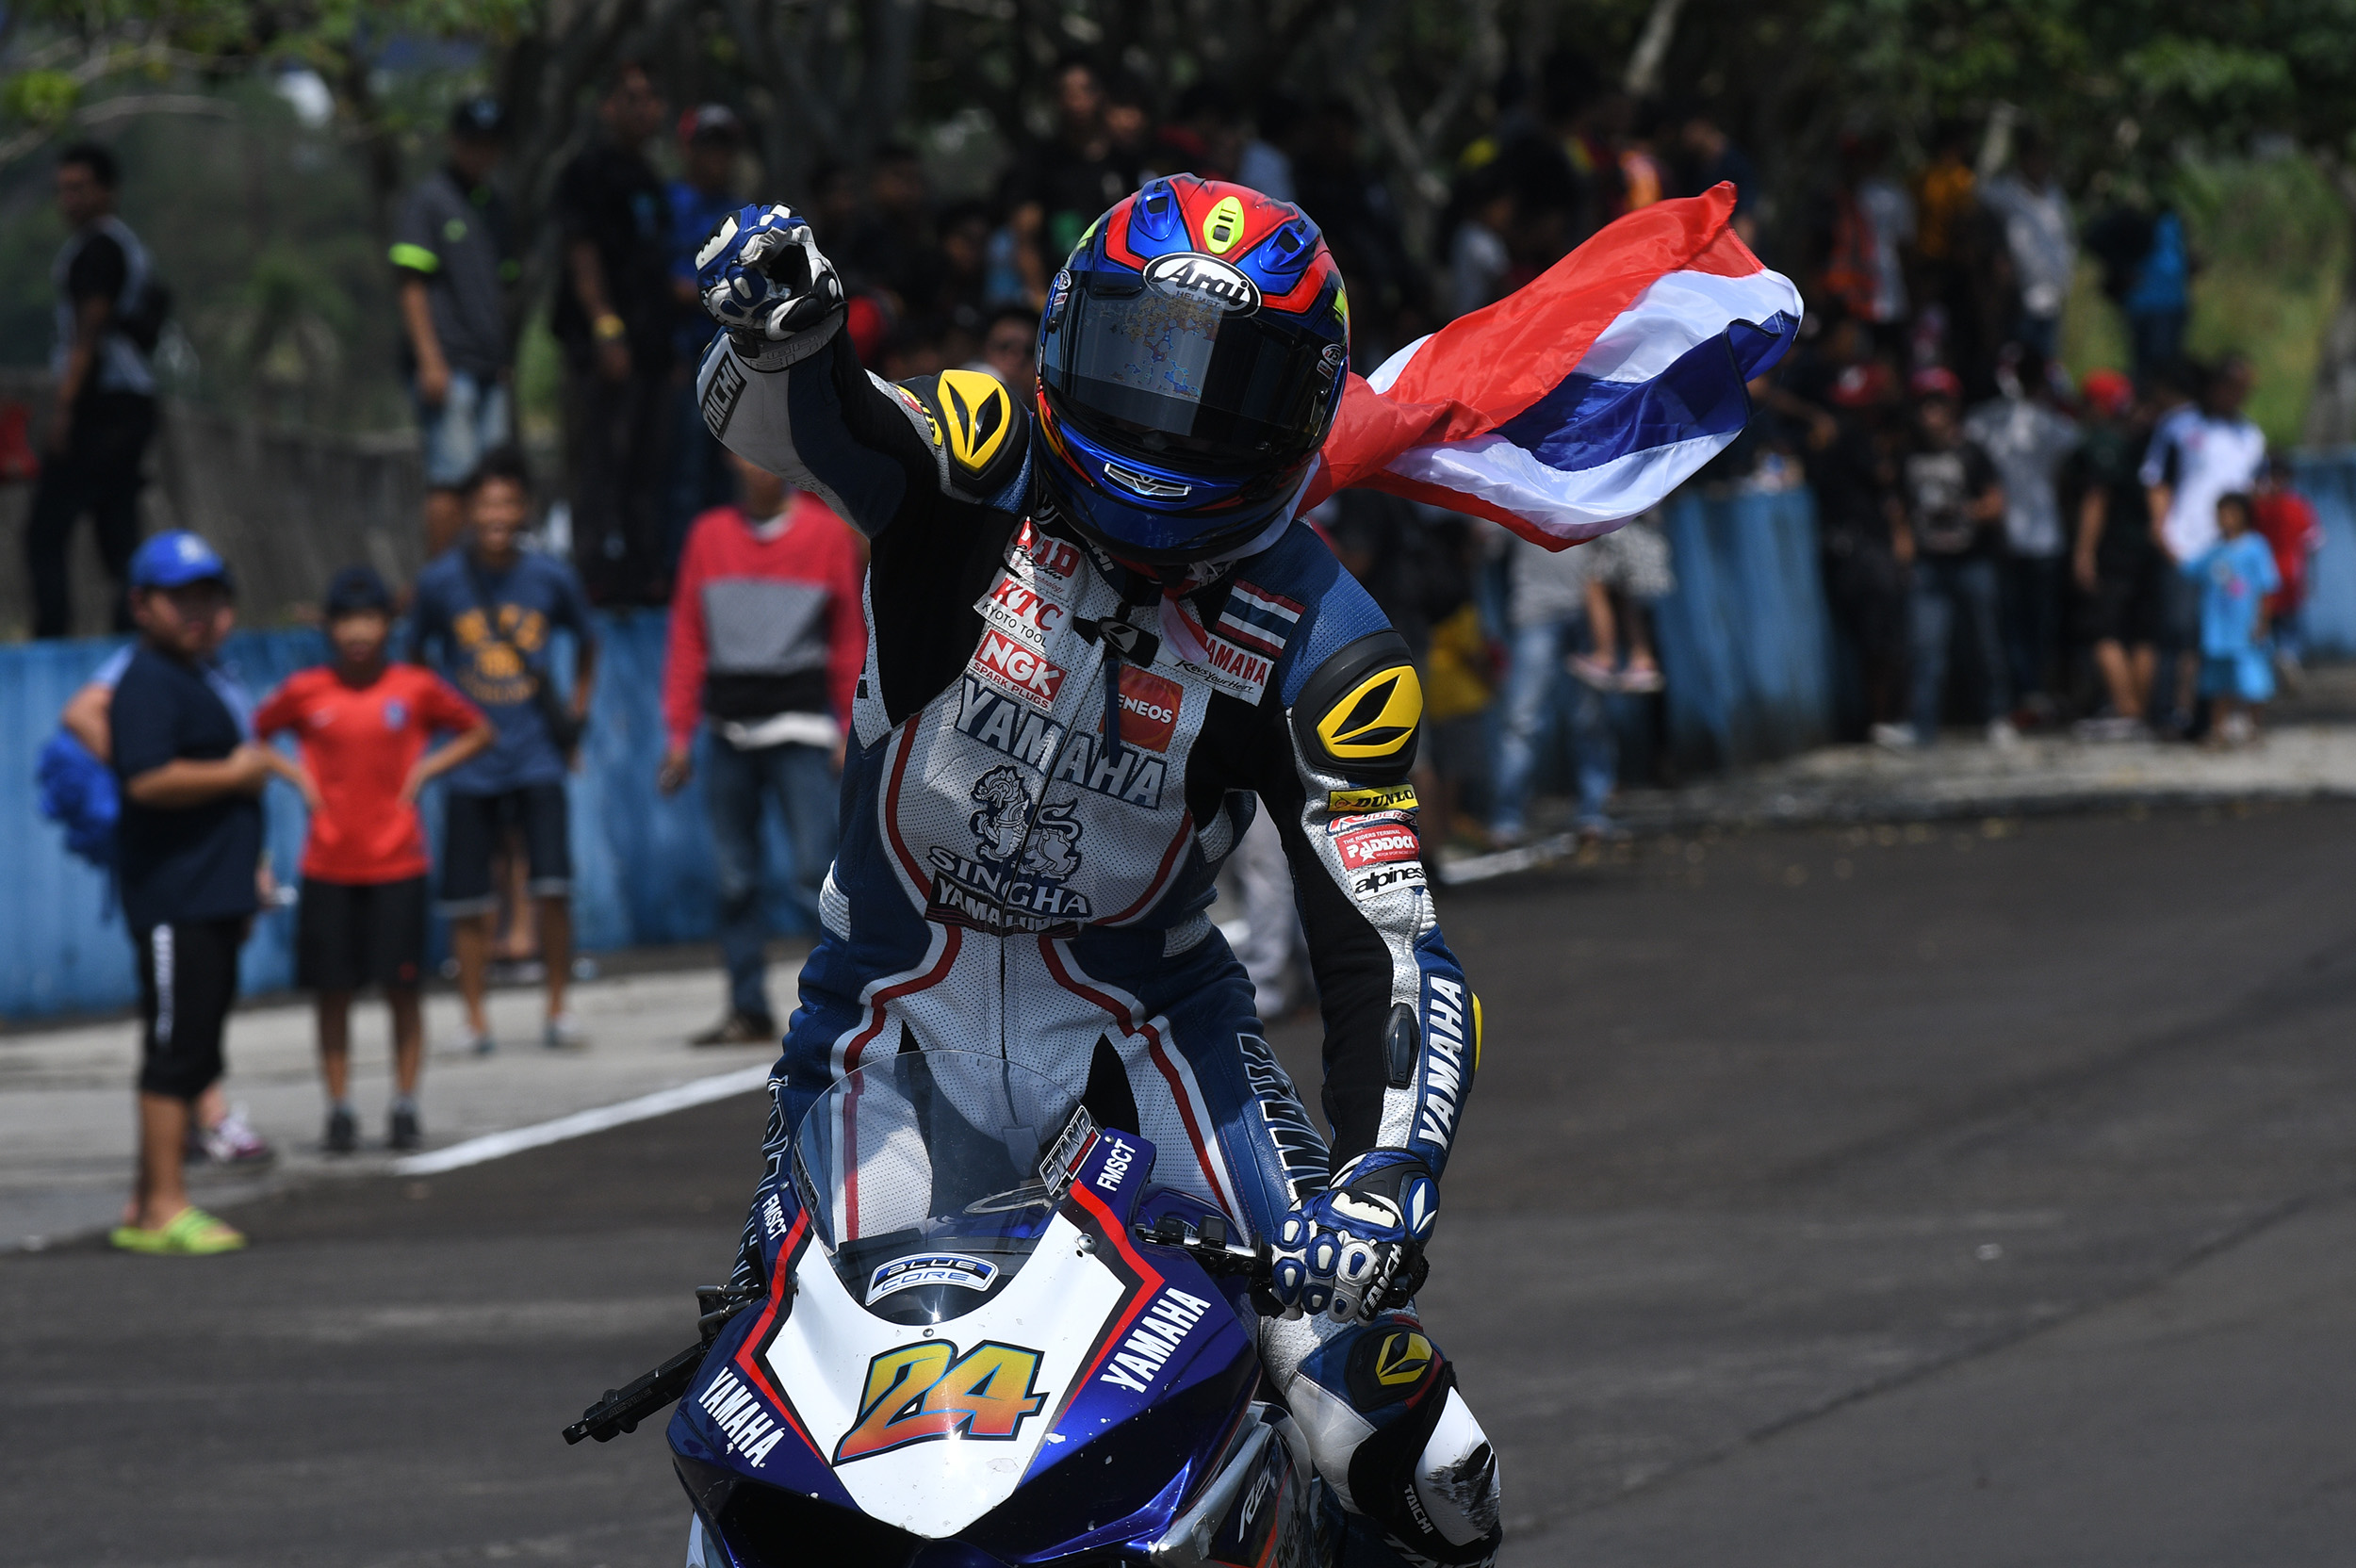 APIWAT BOUNCES BACK FROM DISAPPOINTING RACE 1 (ASIA PRODUCTION 250cc RACE REPORT)